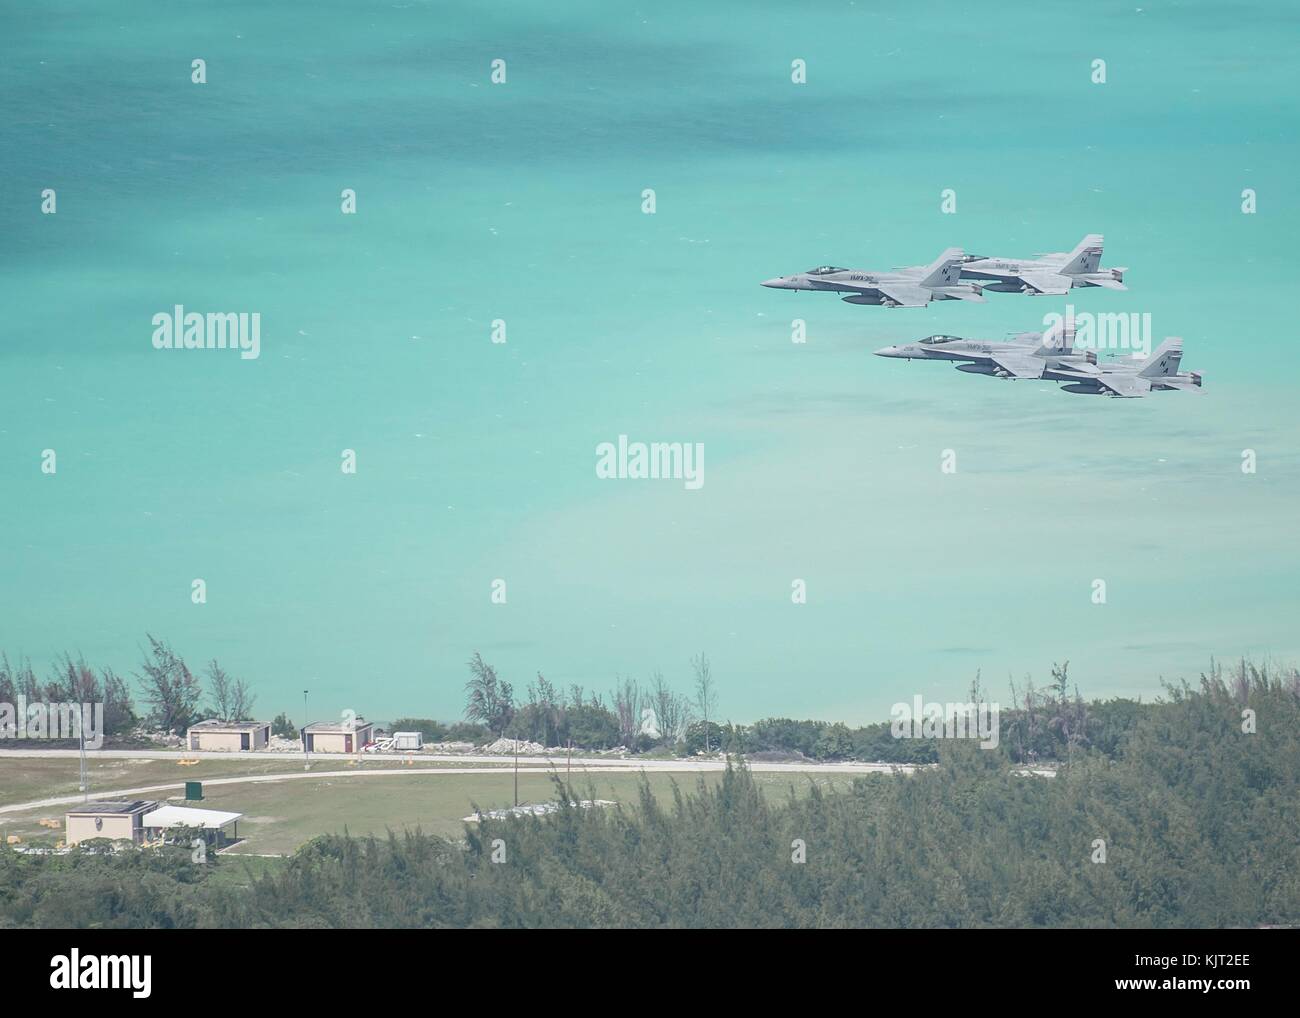 Four U.S. Marine Corps F/A-18C Hornet jet fighter aircraft fly in formation over Wake Island during a U.S. Navy Heritage event October 25, 2017 in the Pacific Ocean. (photo by Conor Minto via Planetpix) Stock Photo